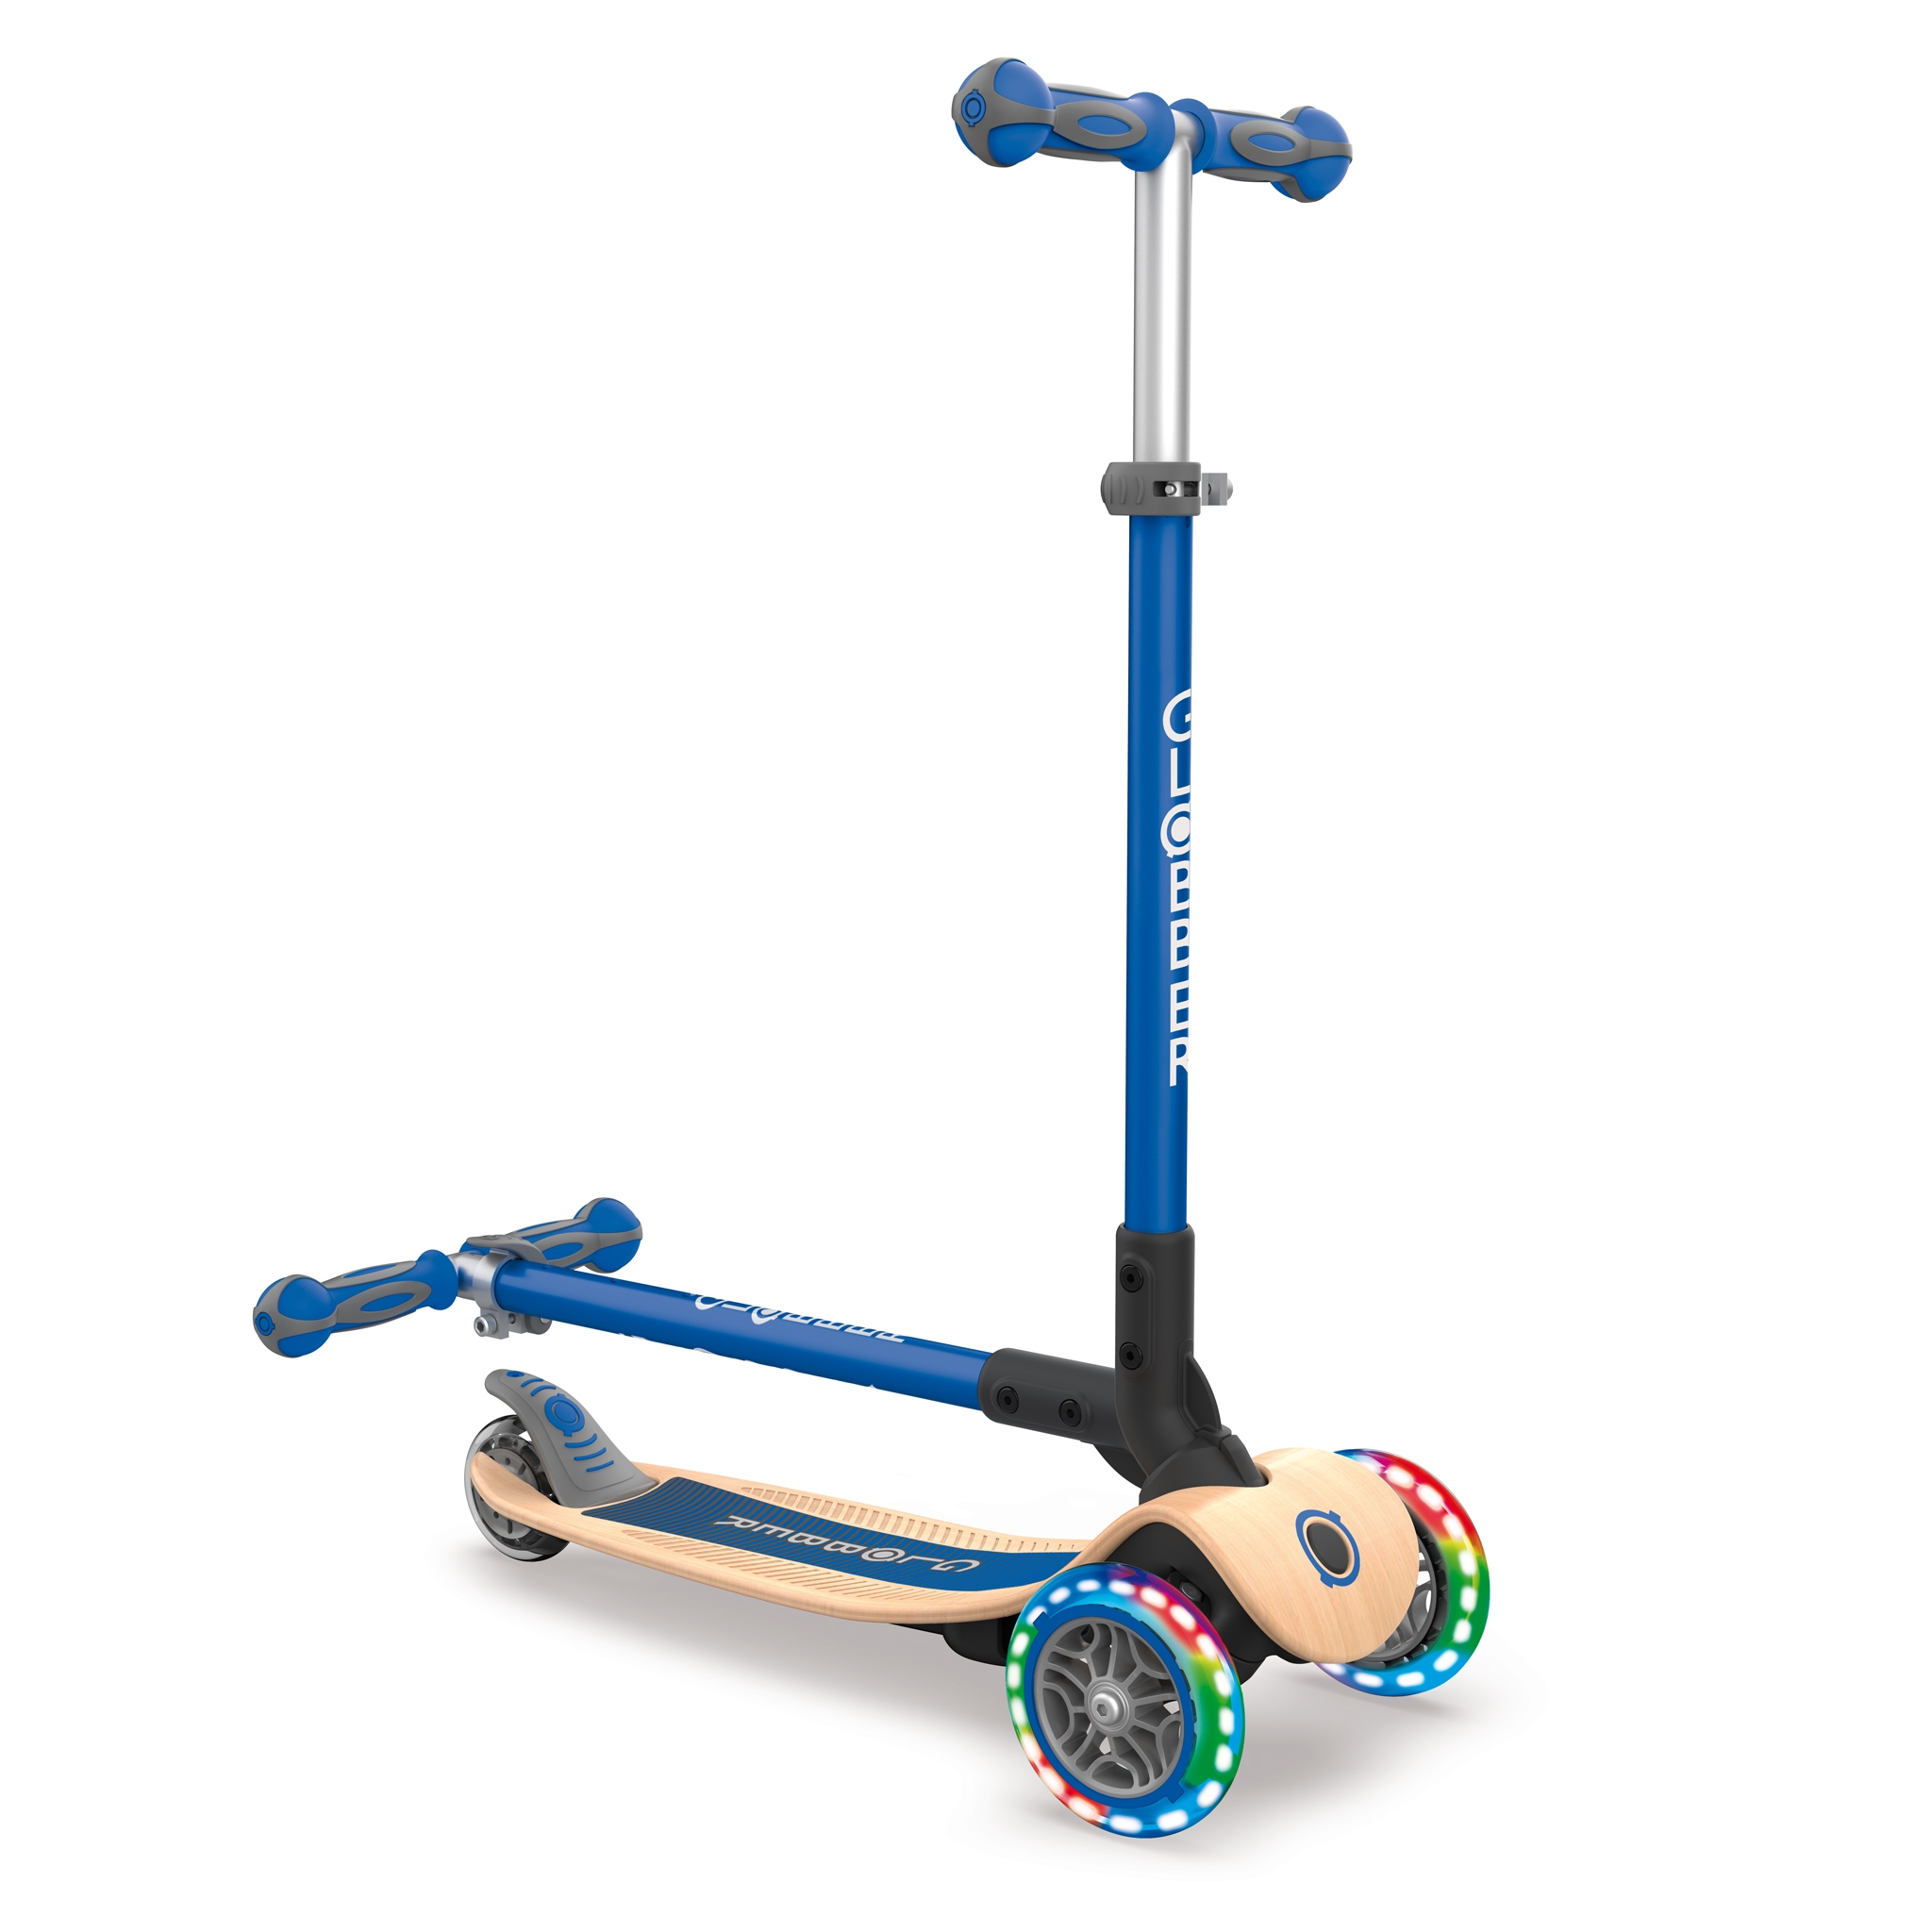 Globber-PRIMO-FOLDABLE-WOOD-LIGHTS-3-wheel-foldable-light-up-scooter-with-7-ply-wooden-scooter-deck-and-light-up-wheels 2